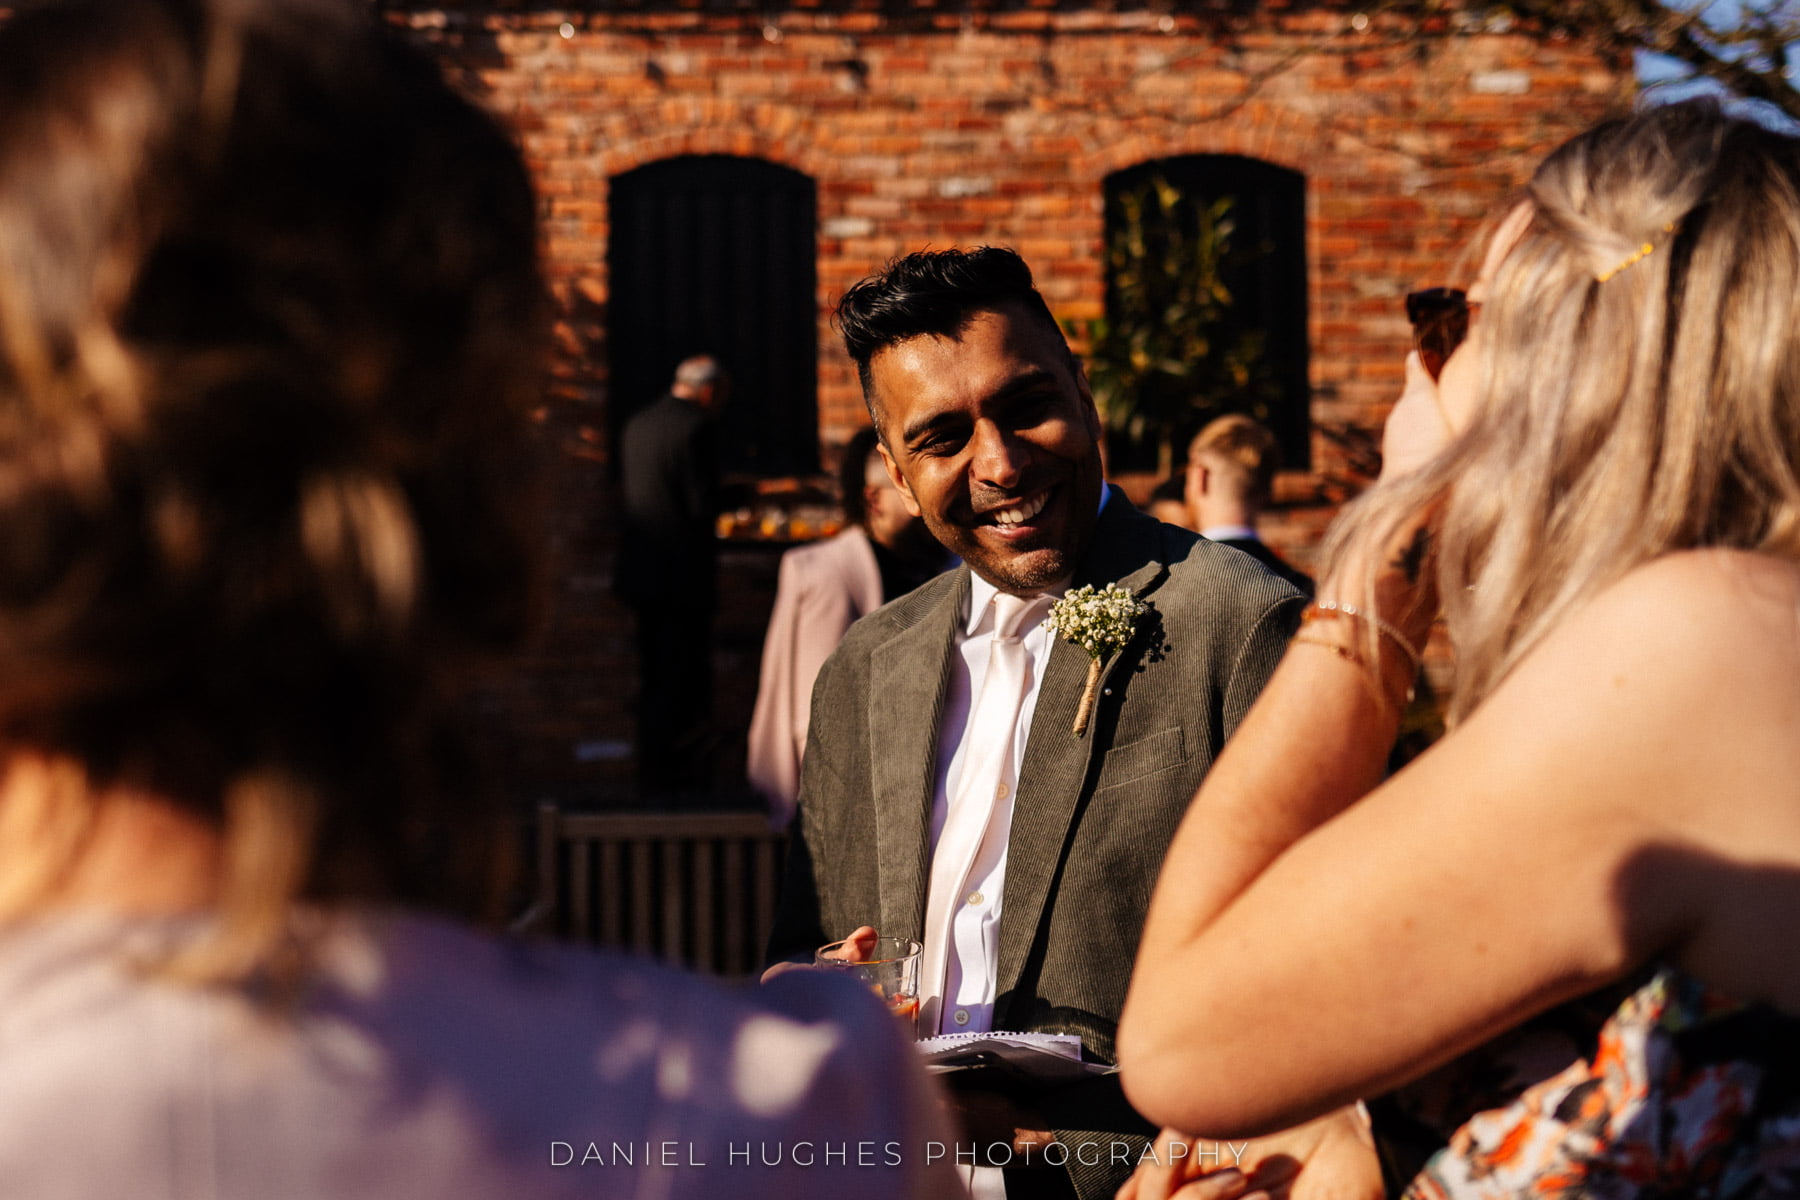 A wedding guest is smiling, with the Exposed brickwork of the Barley Barn behind him.